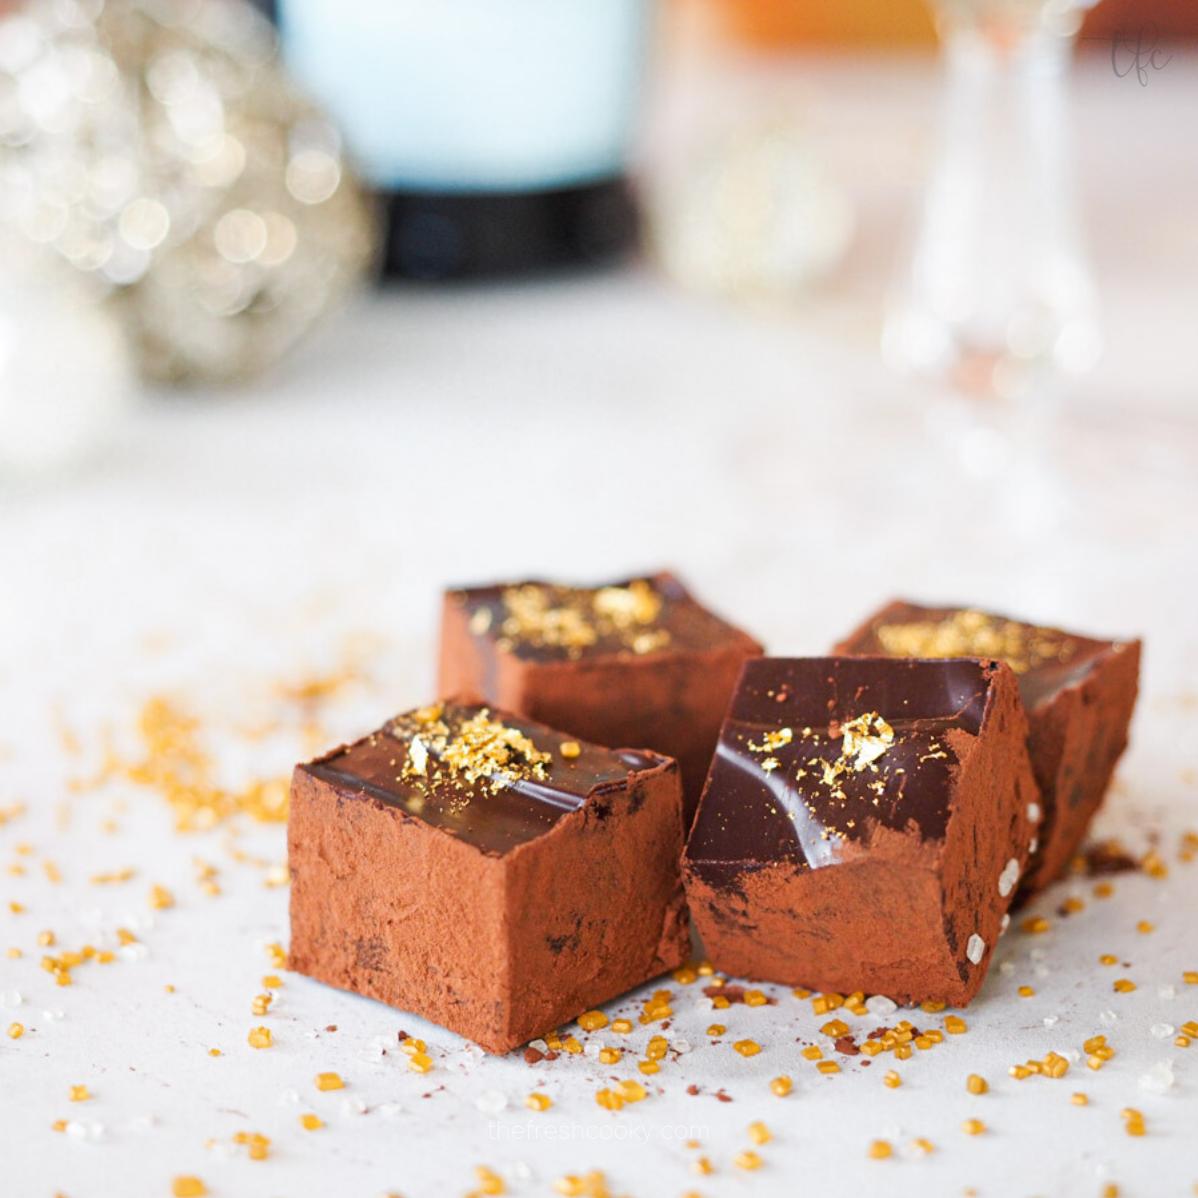  These sweet treats are as decadent as they are beautiful, with a shimmering golden finish.